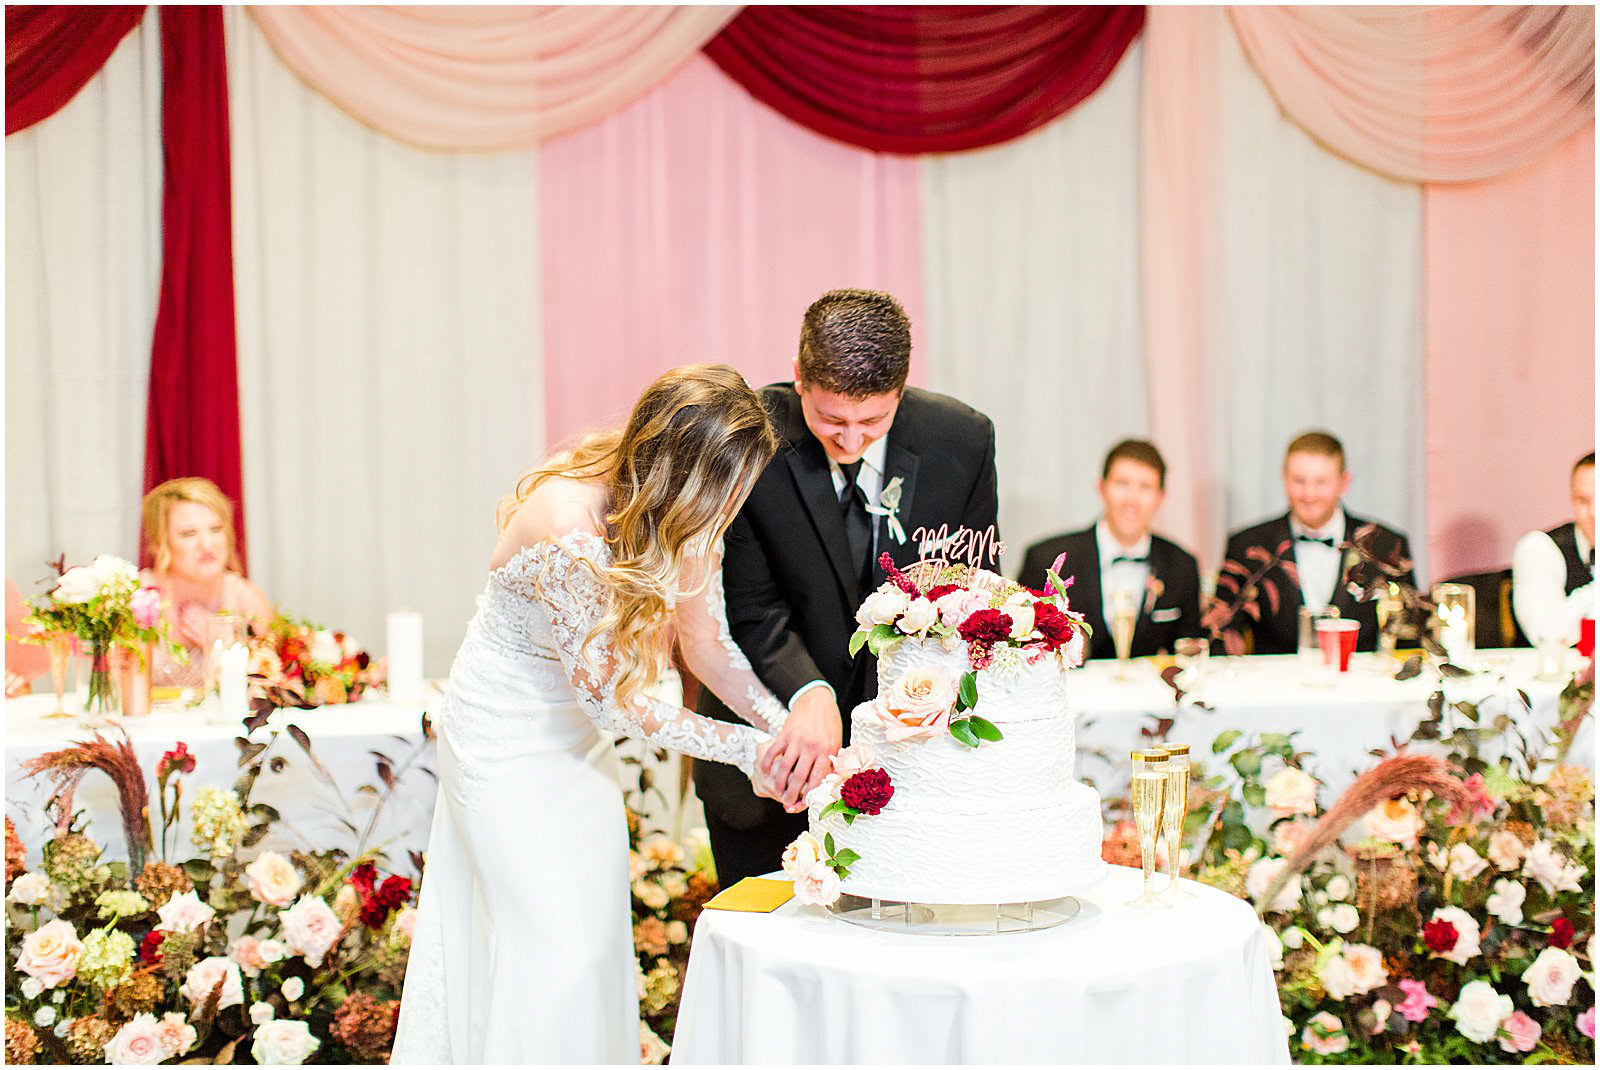 A Romantic Fall Wedding in Ferdinand, IN | Tori and Kyle | Bret and Brandie Photography 0136.jpg